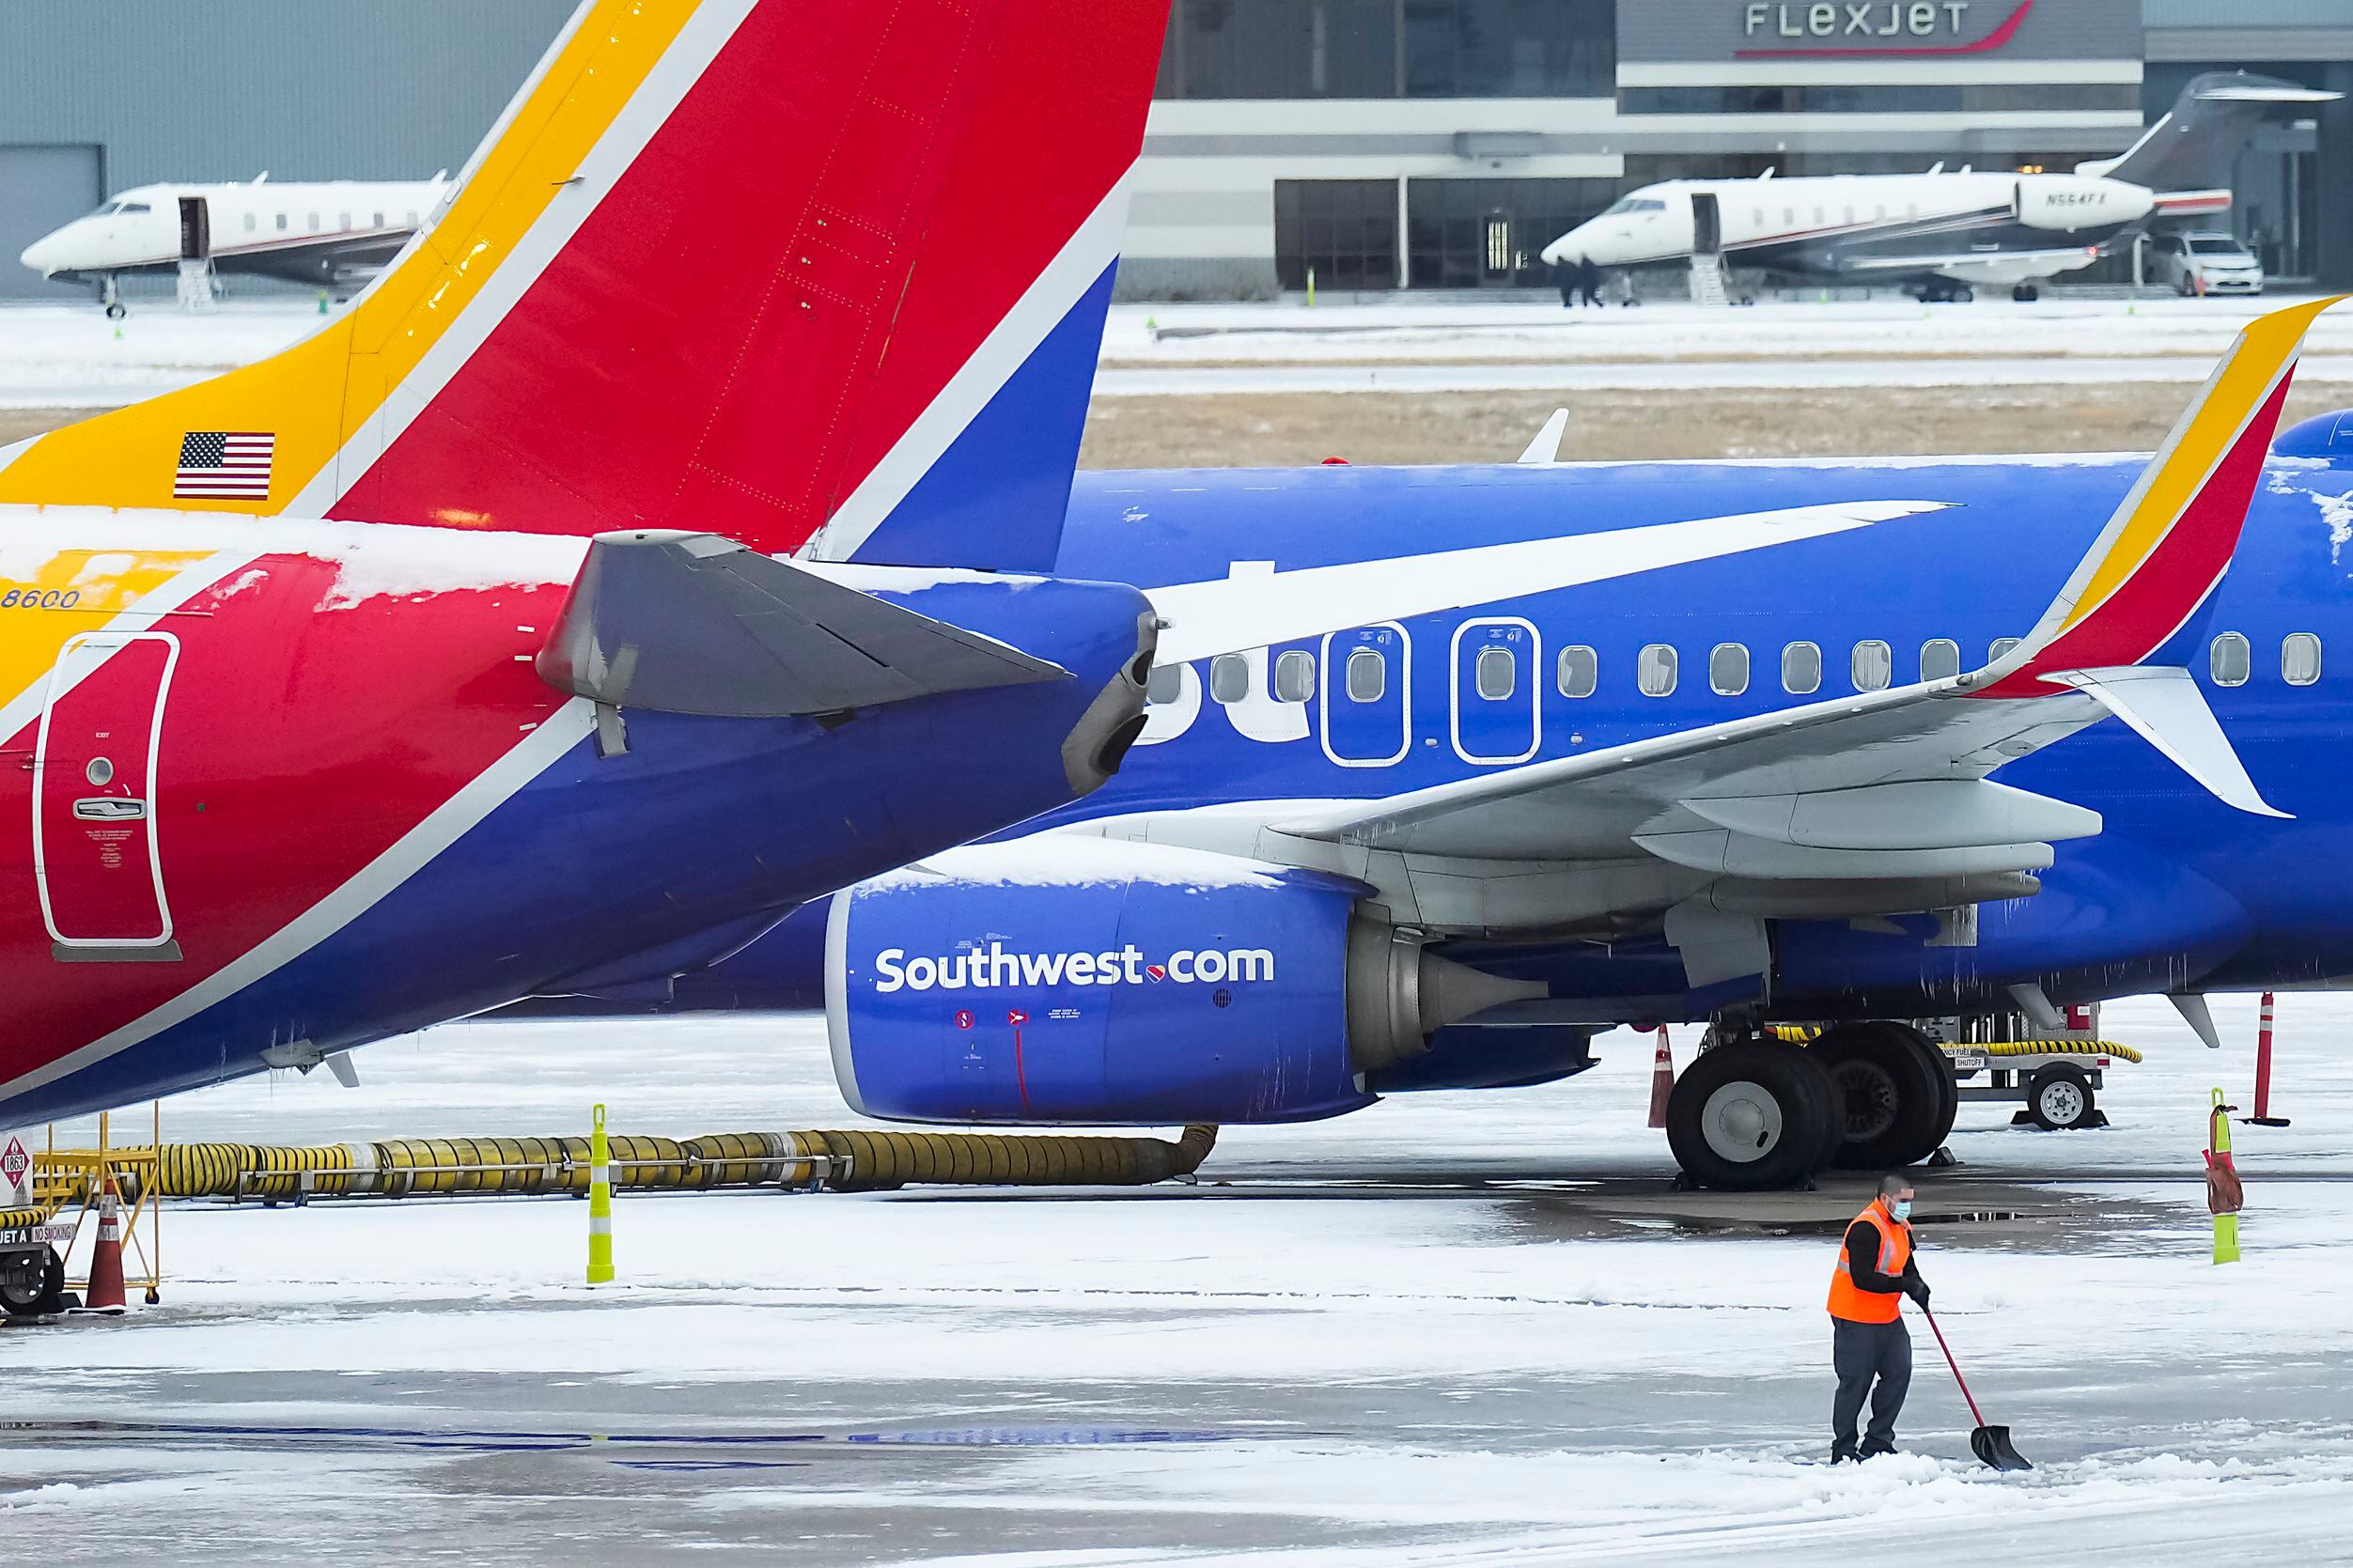 A worker shovels snow on the ramp near Southwest Airlines planes parked at the gates at...